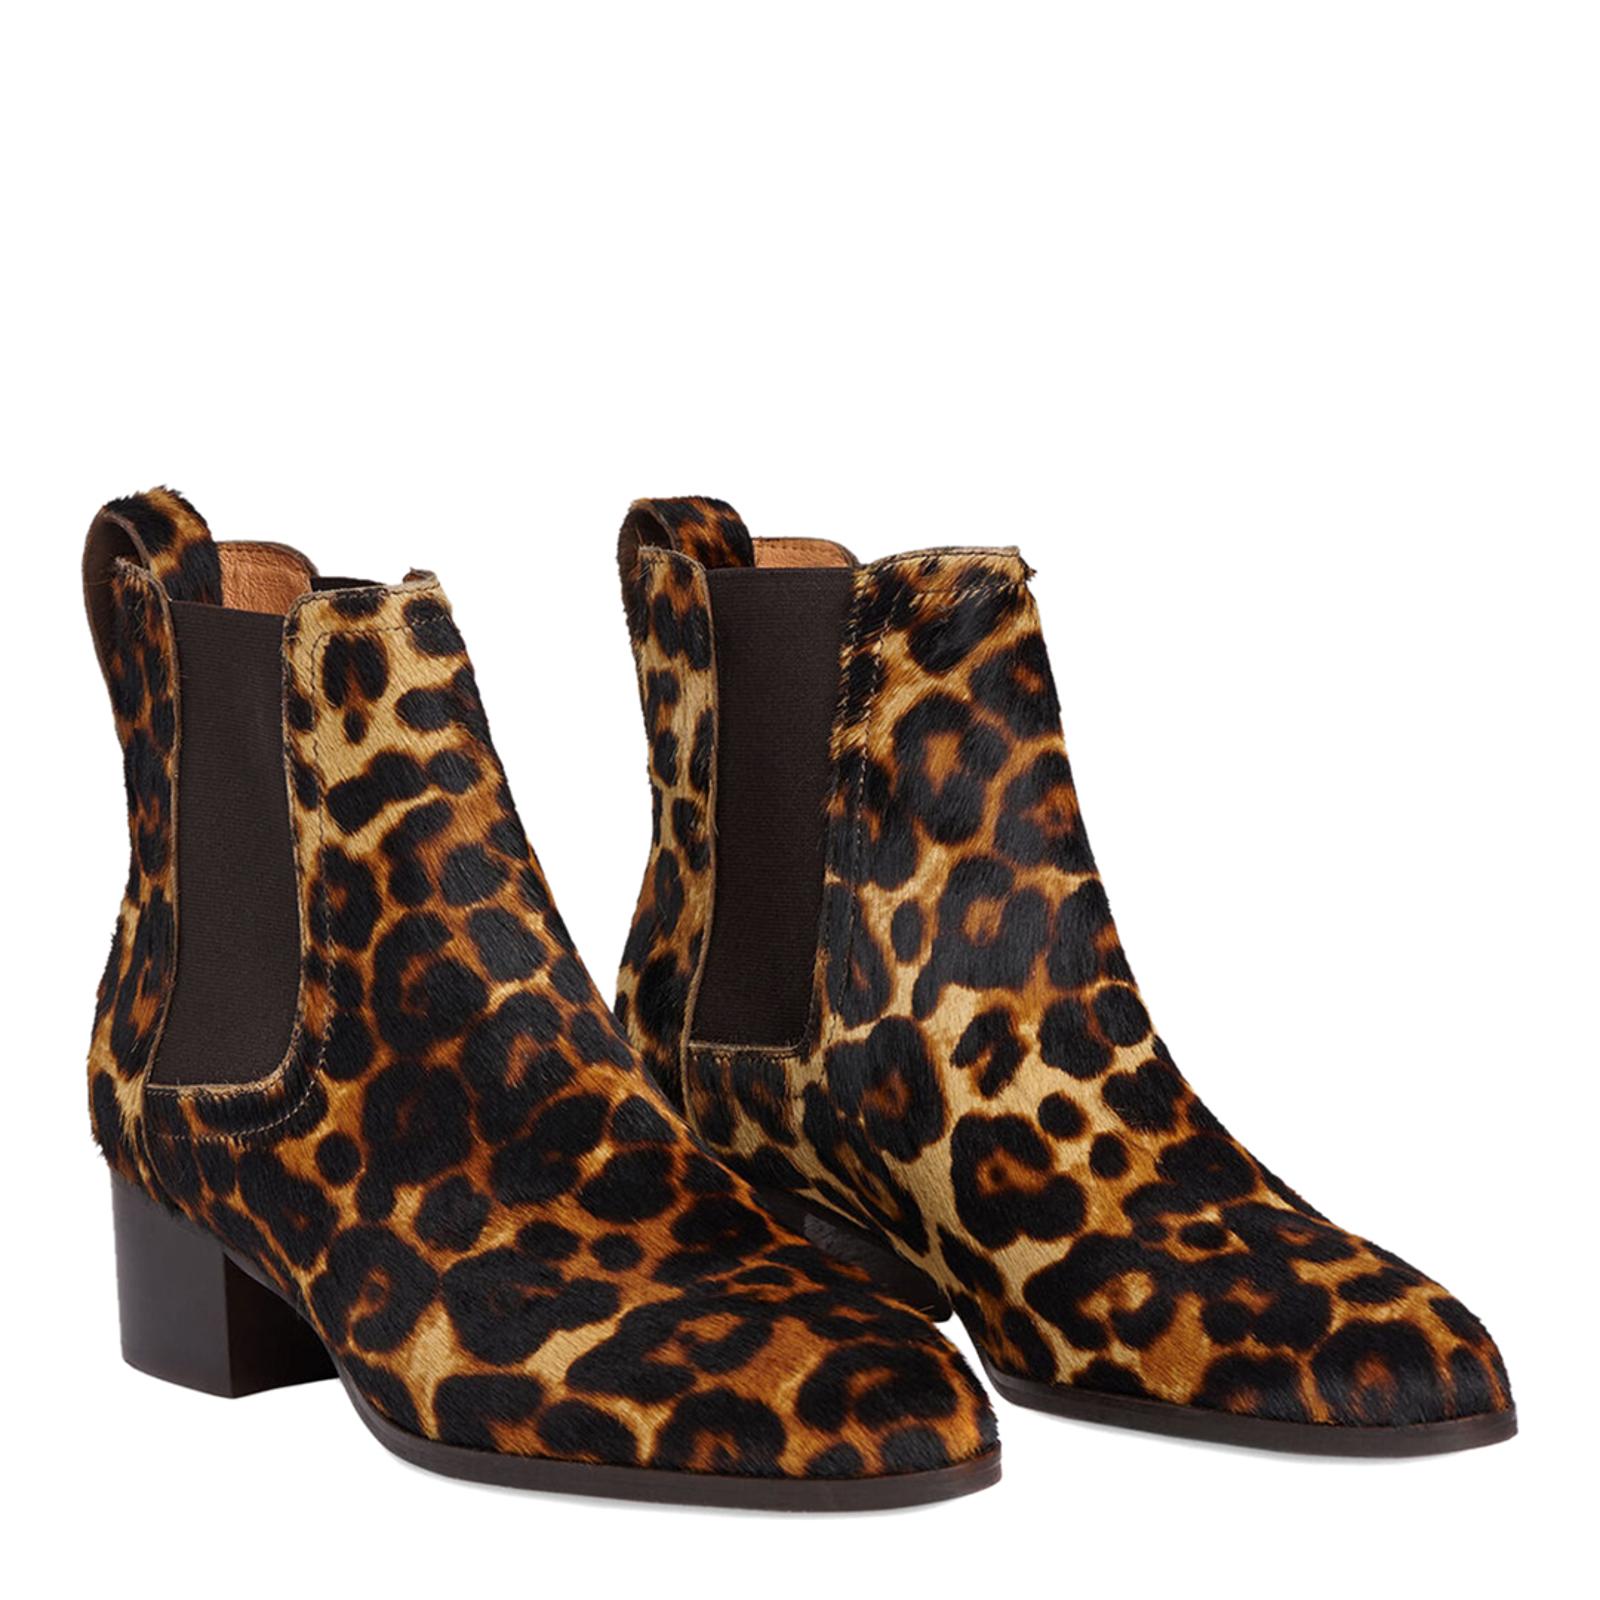 Leopard Print Daisley Leather Boots - BrandAlley